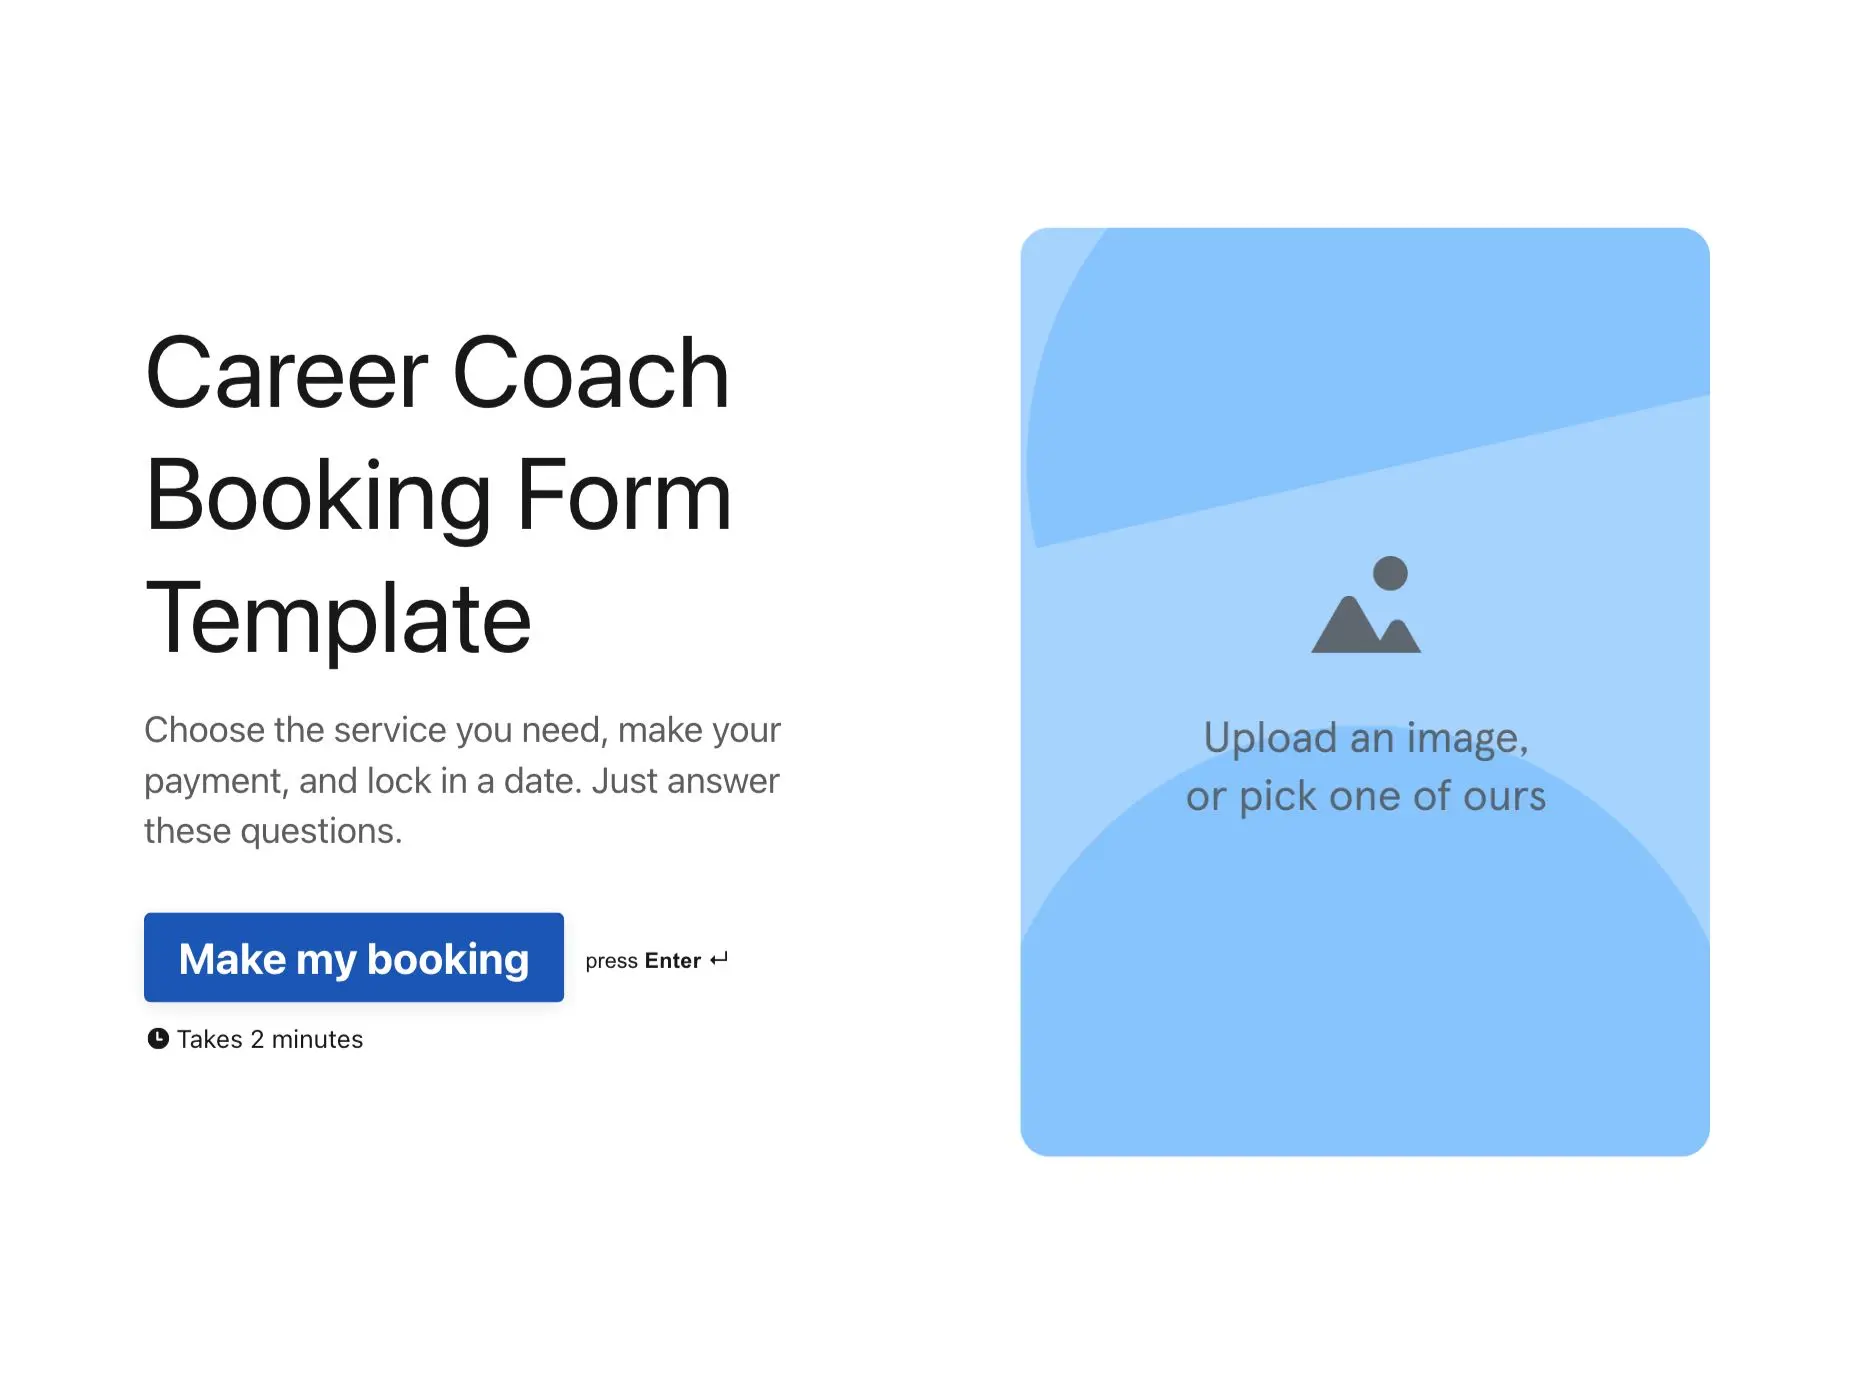 Career Coach Booking Form Template Hero